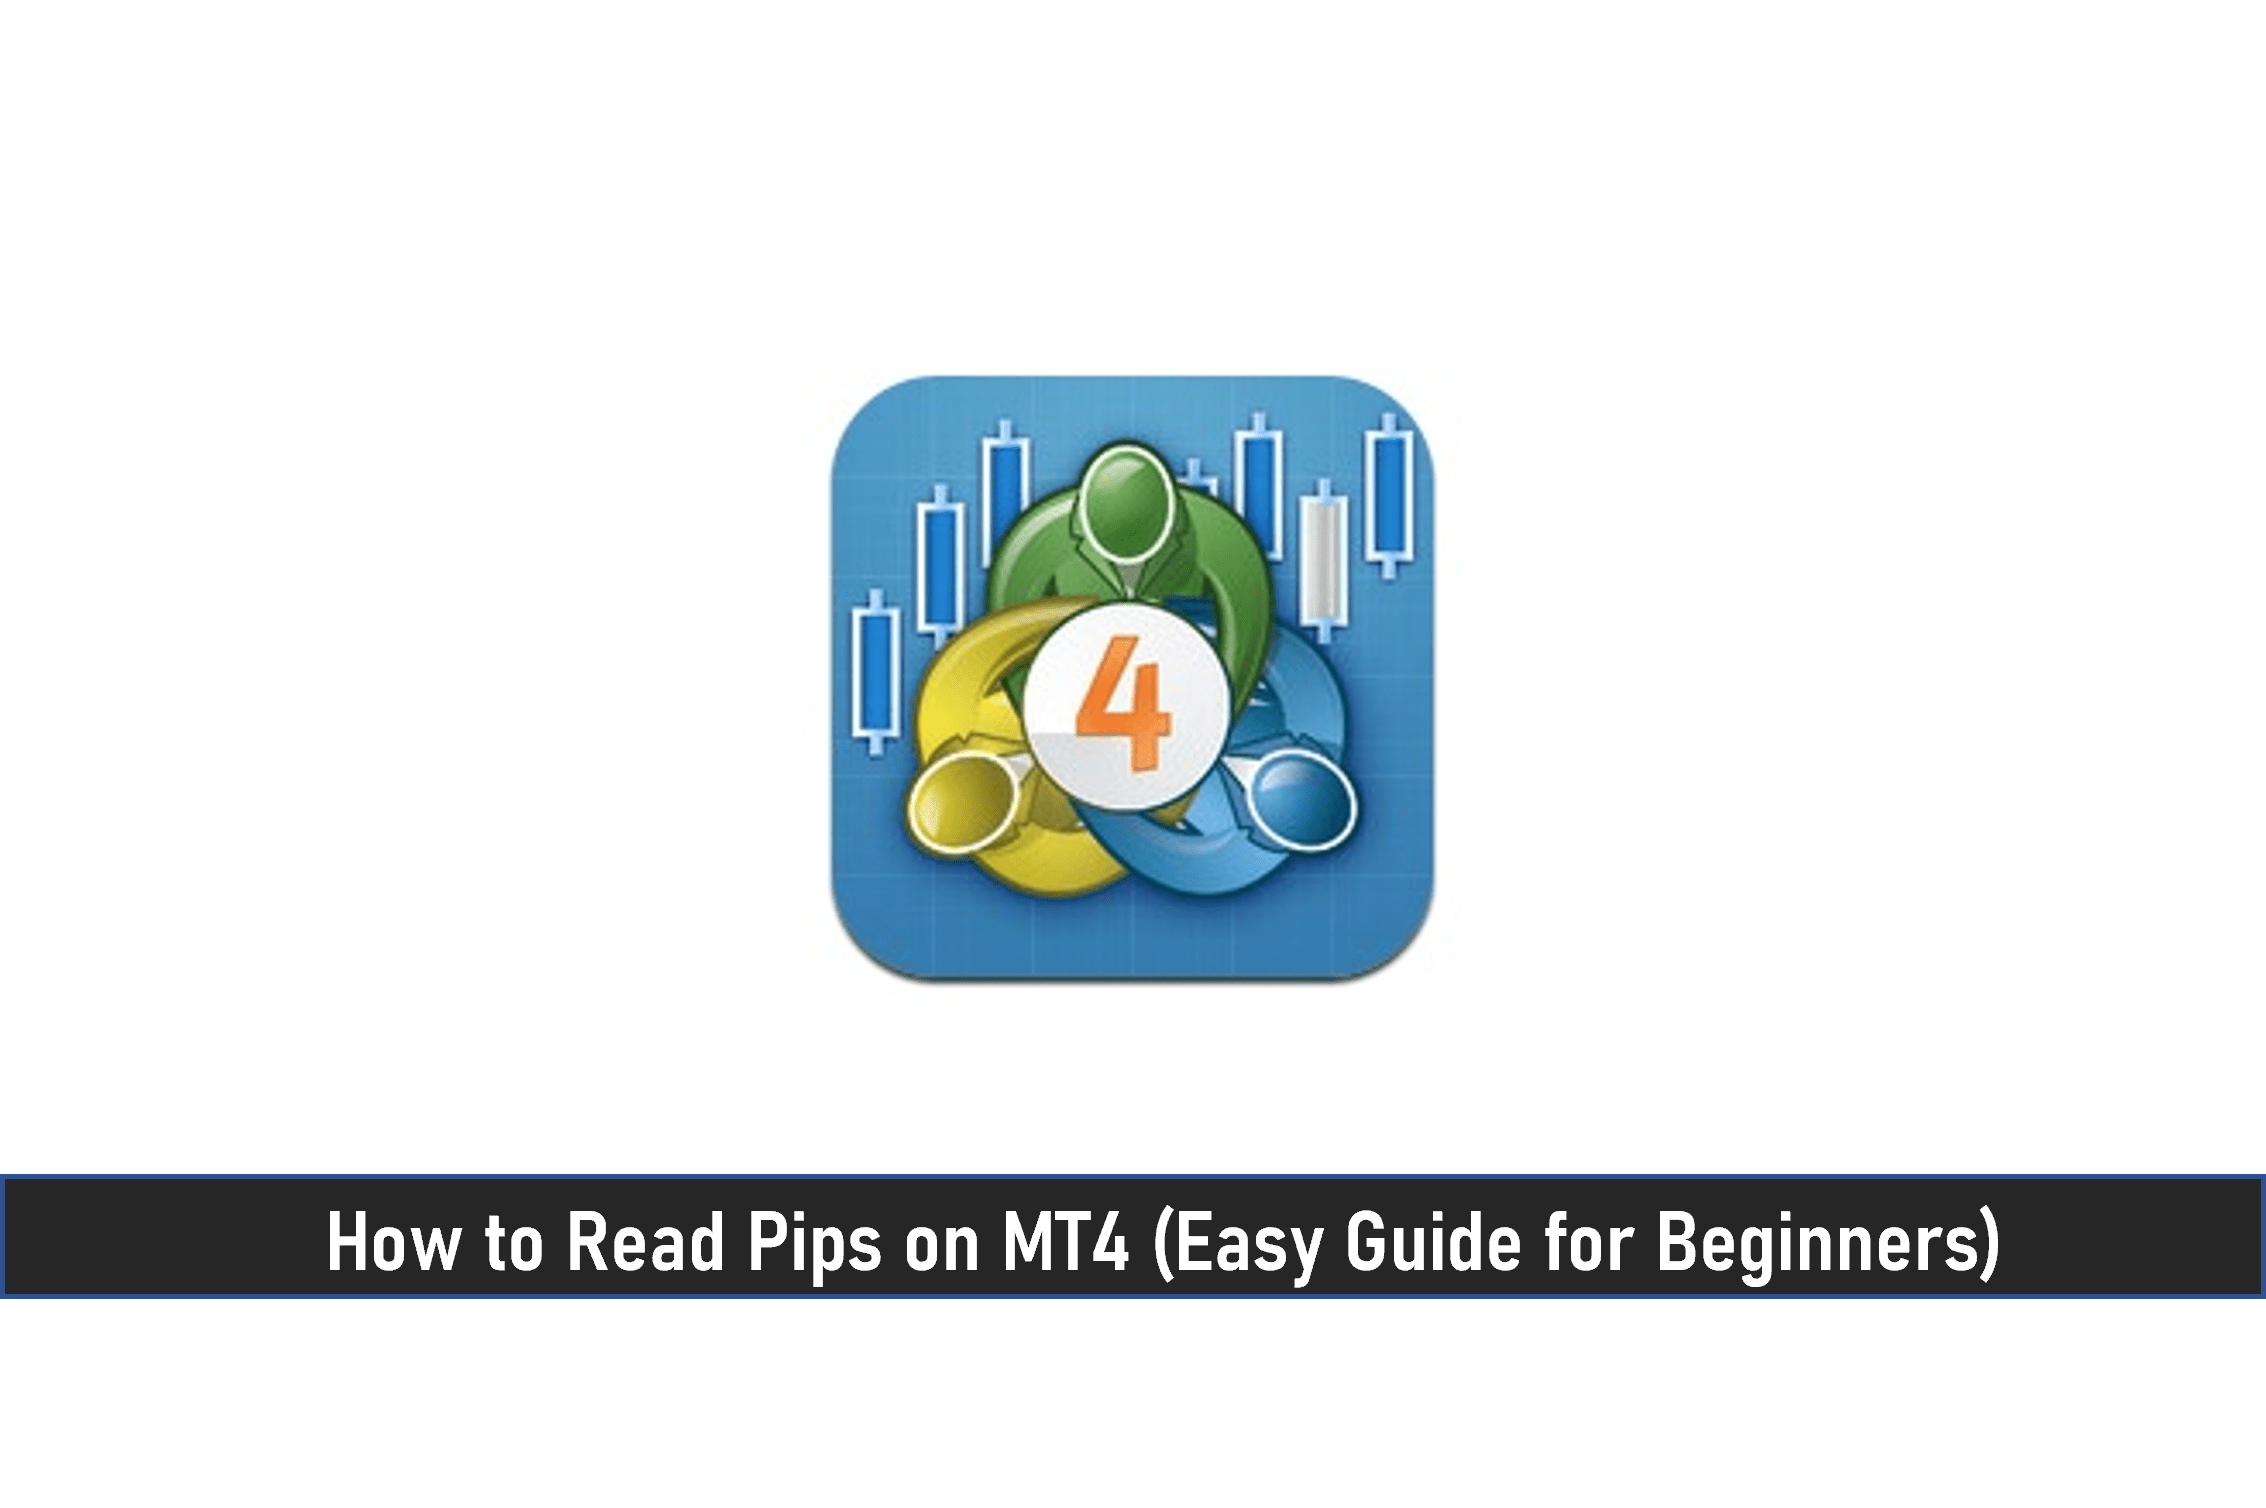 How to Read Pips on MT4 (Easy Guide for Beginners)